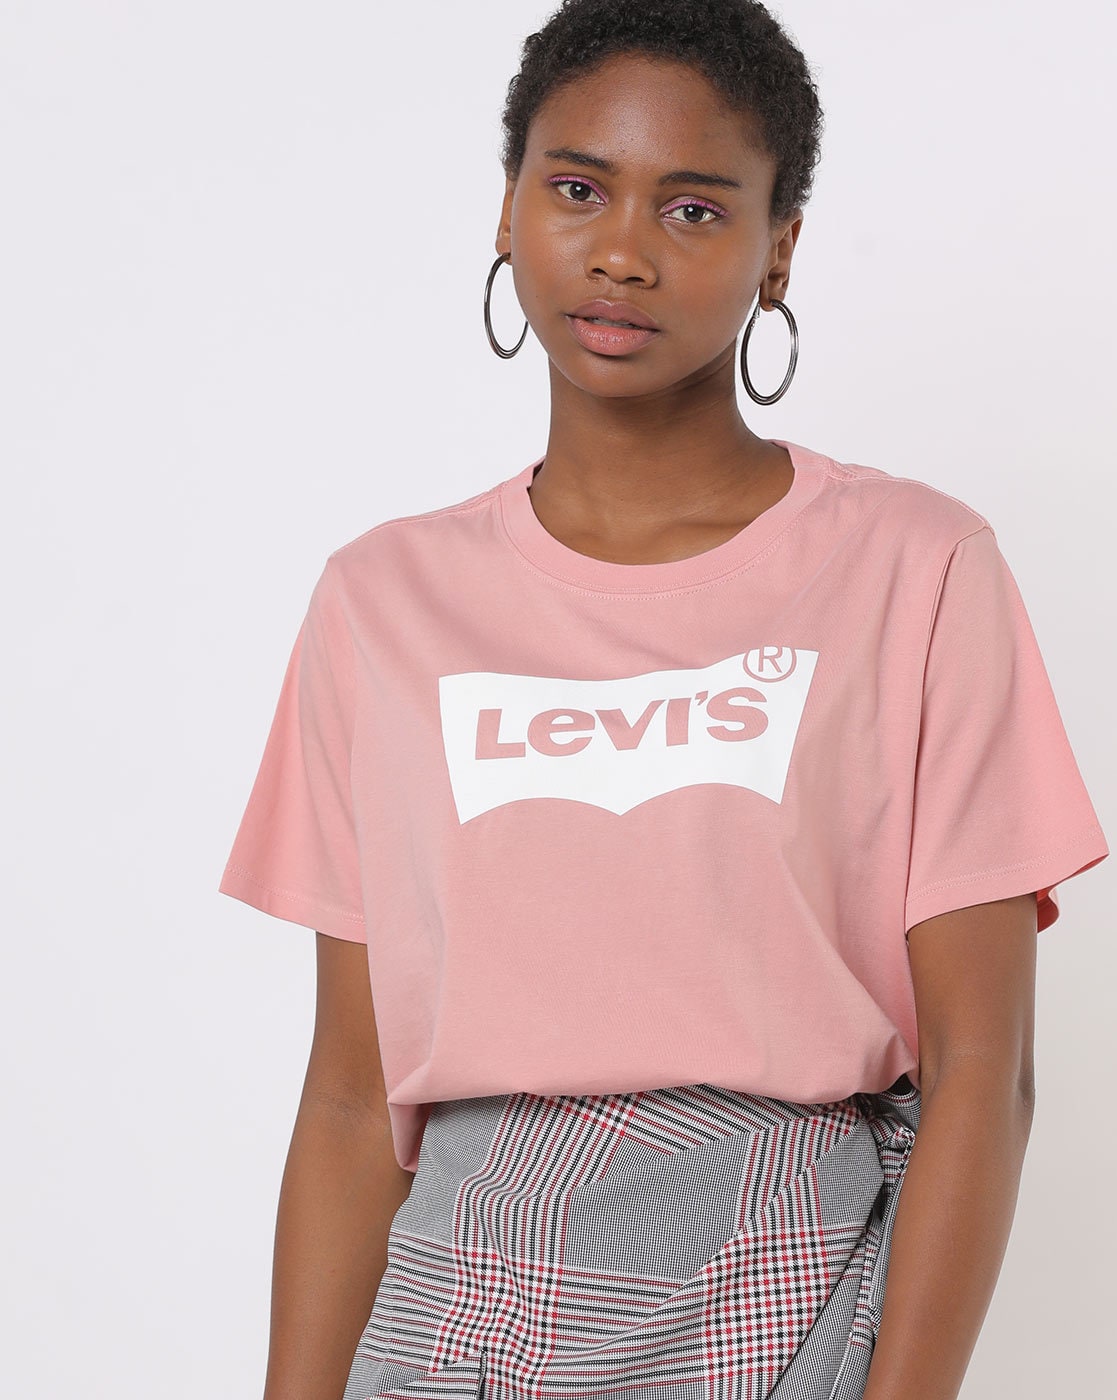 levi's t shirts for ladies